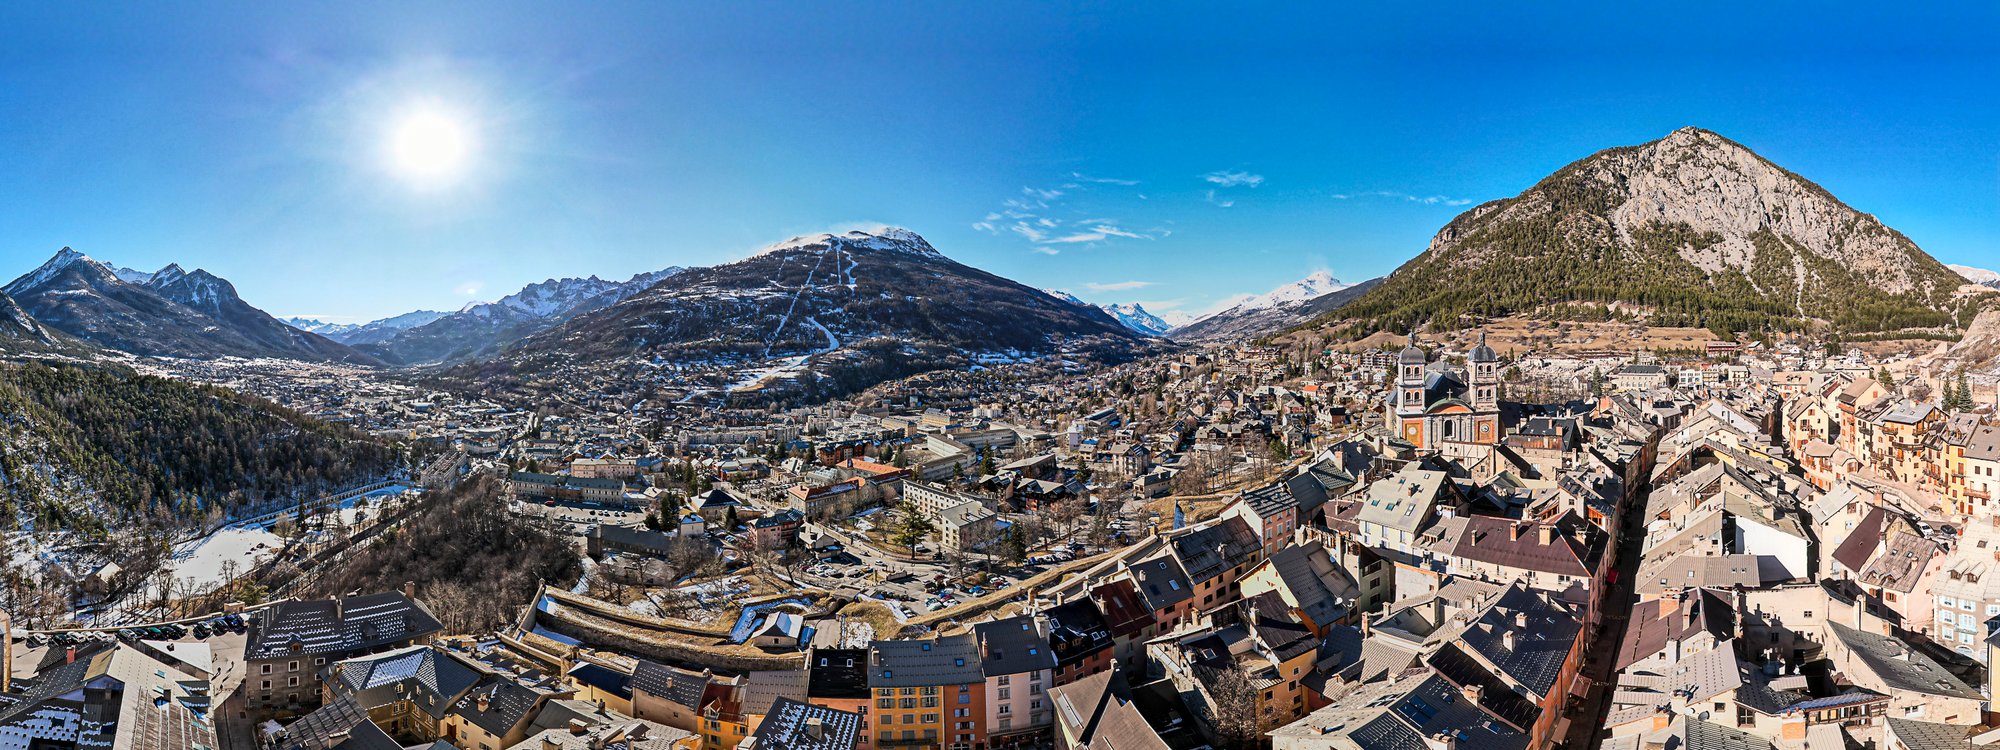 Looking north towards the old town, Briançon, France.